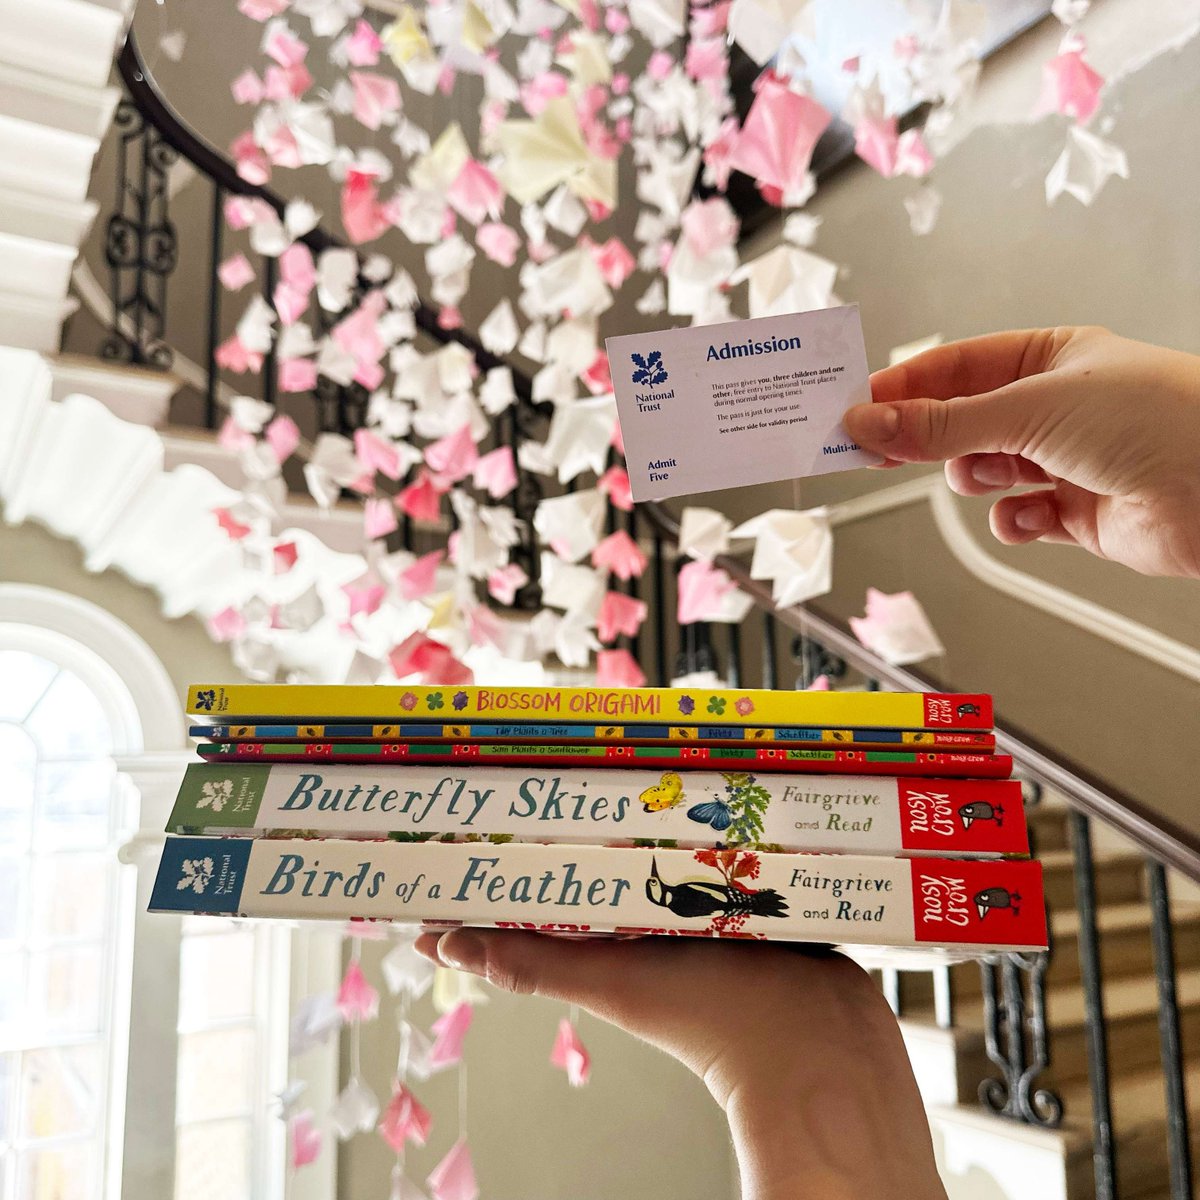 ✨🌸SPRING GIVEAWAY🌸✨ To celebrate the season of spring, we're giving away a @nationaltrust book bundle AND a @nationaltrust card that permits a family of five into all National Trust locations for a whole year to 1 lucky winner! Follow, like & RT to enter! UK only, ends 27/5